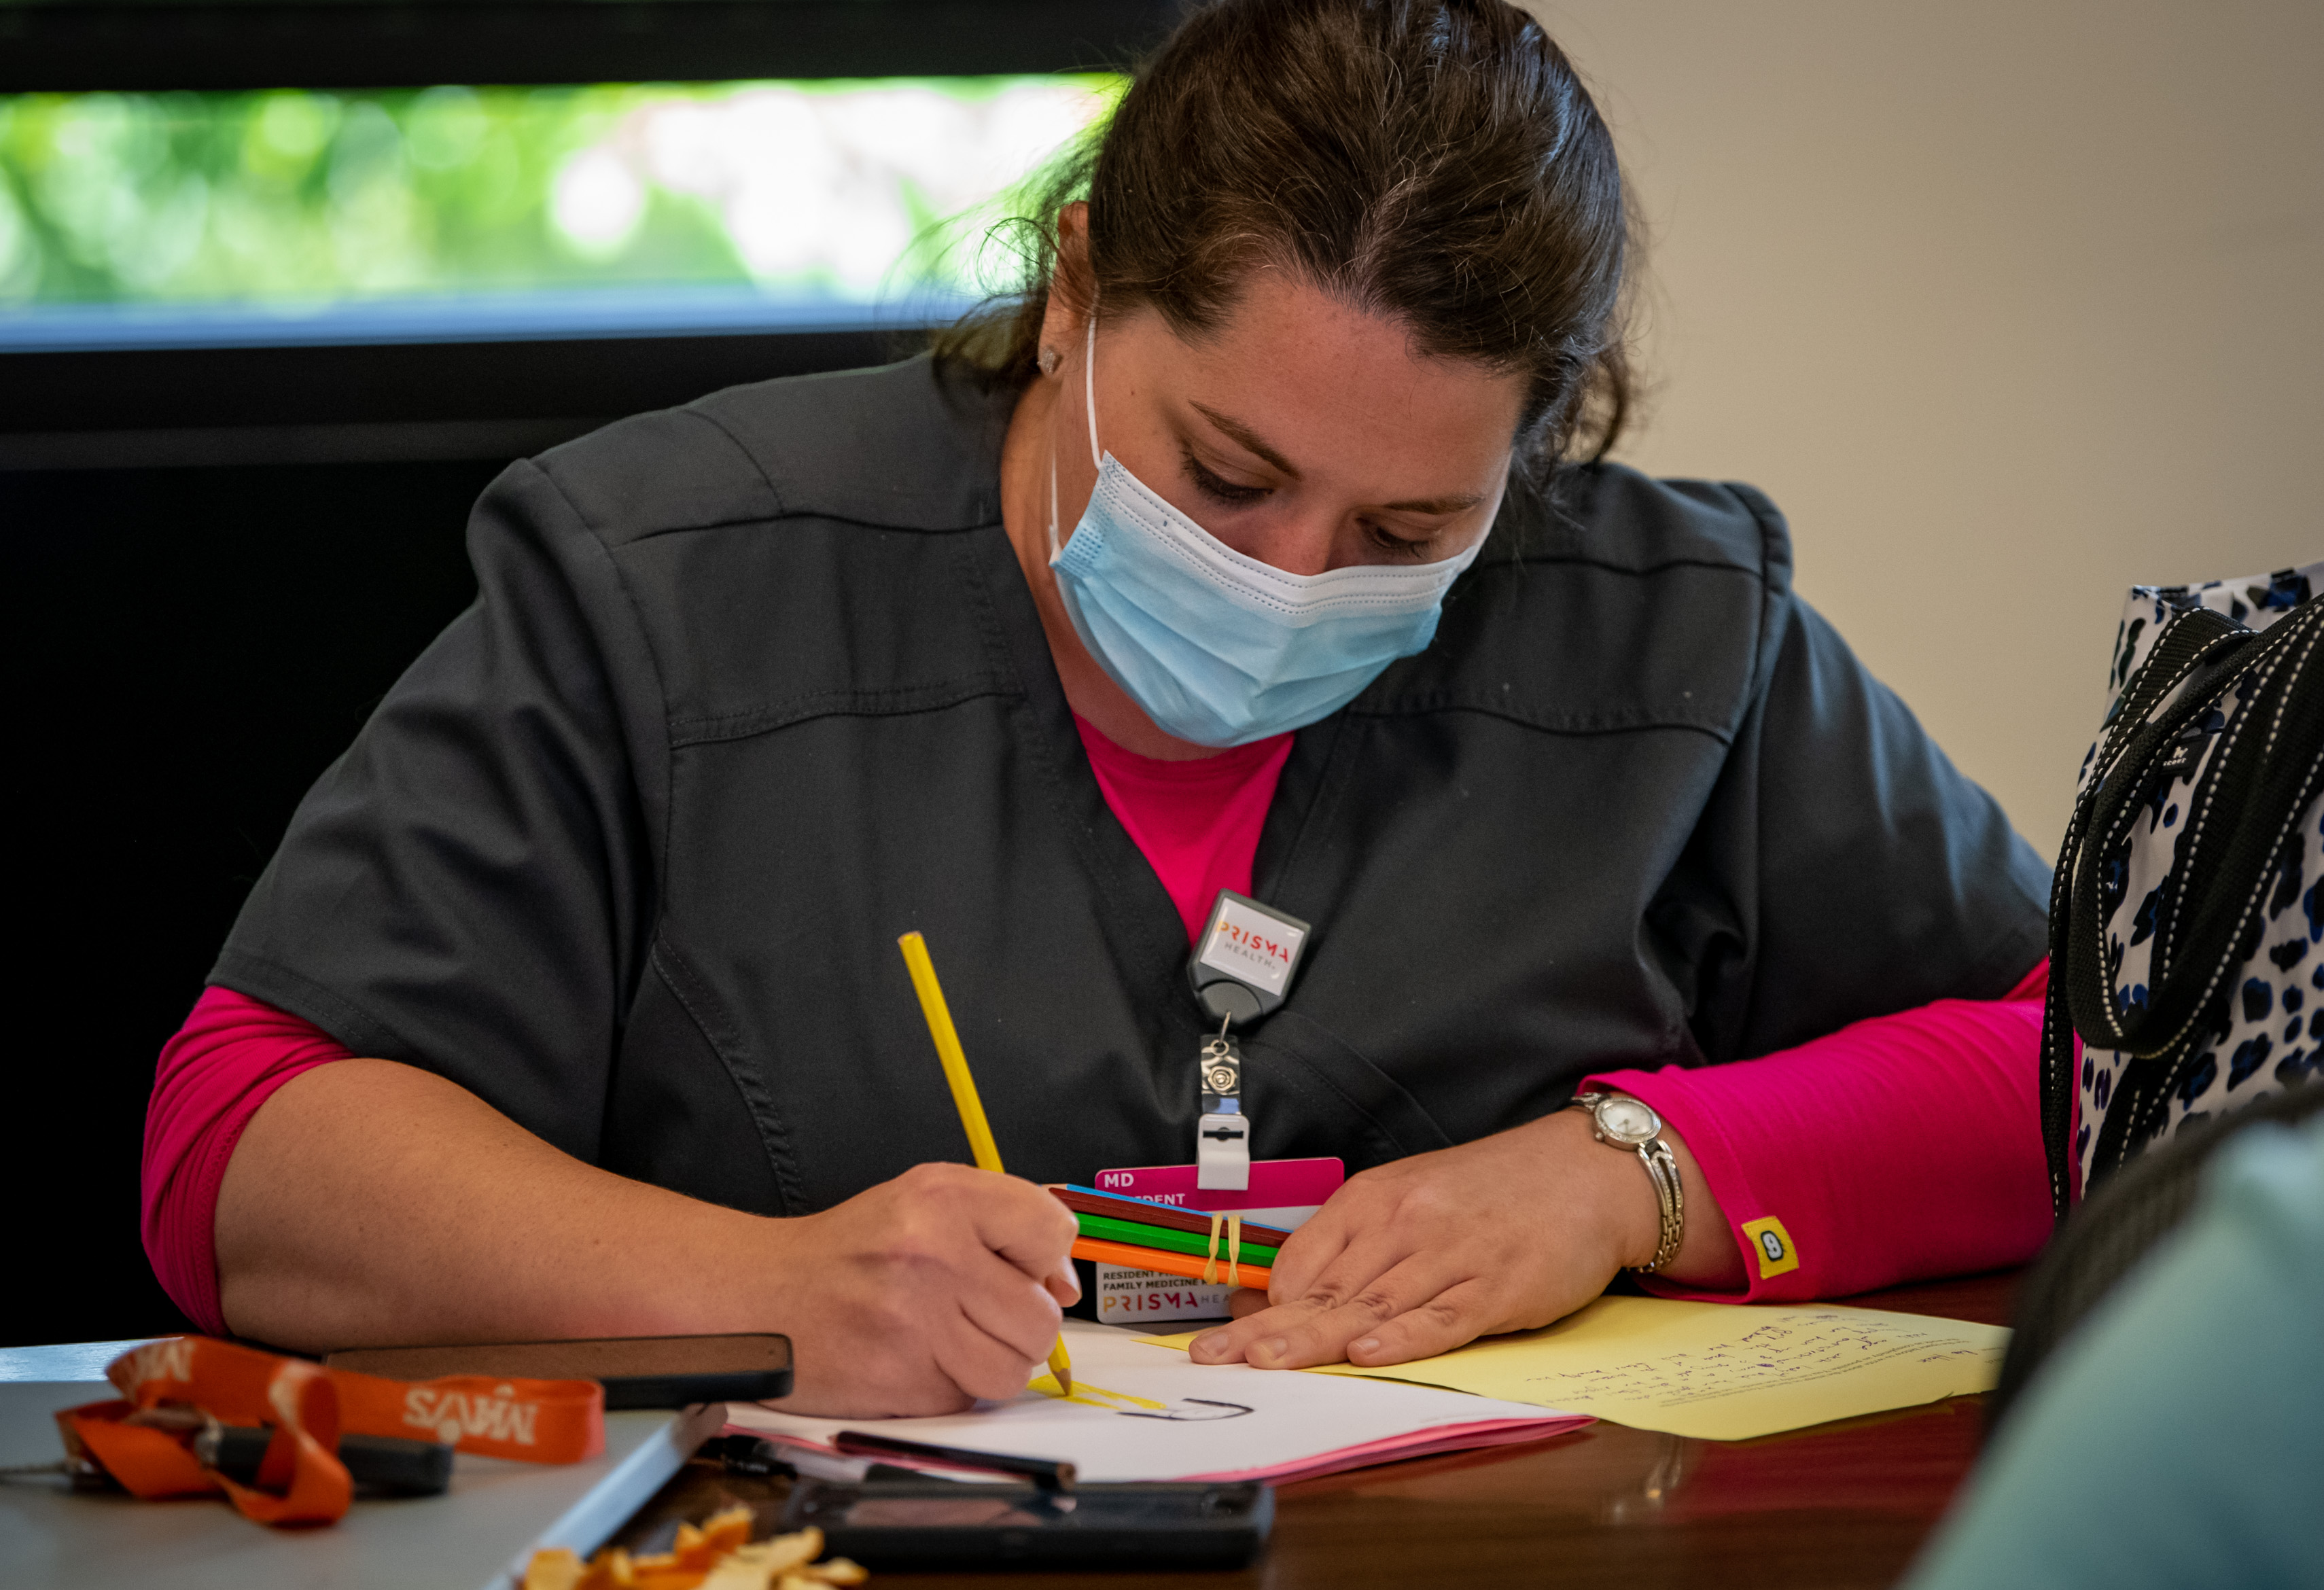 A woman in scrubs and a mask draws with colored pencils.